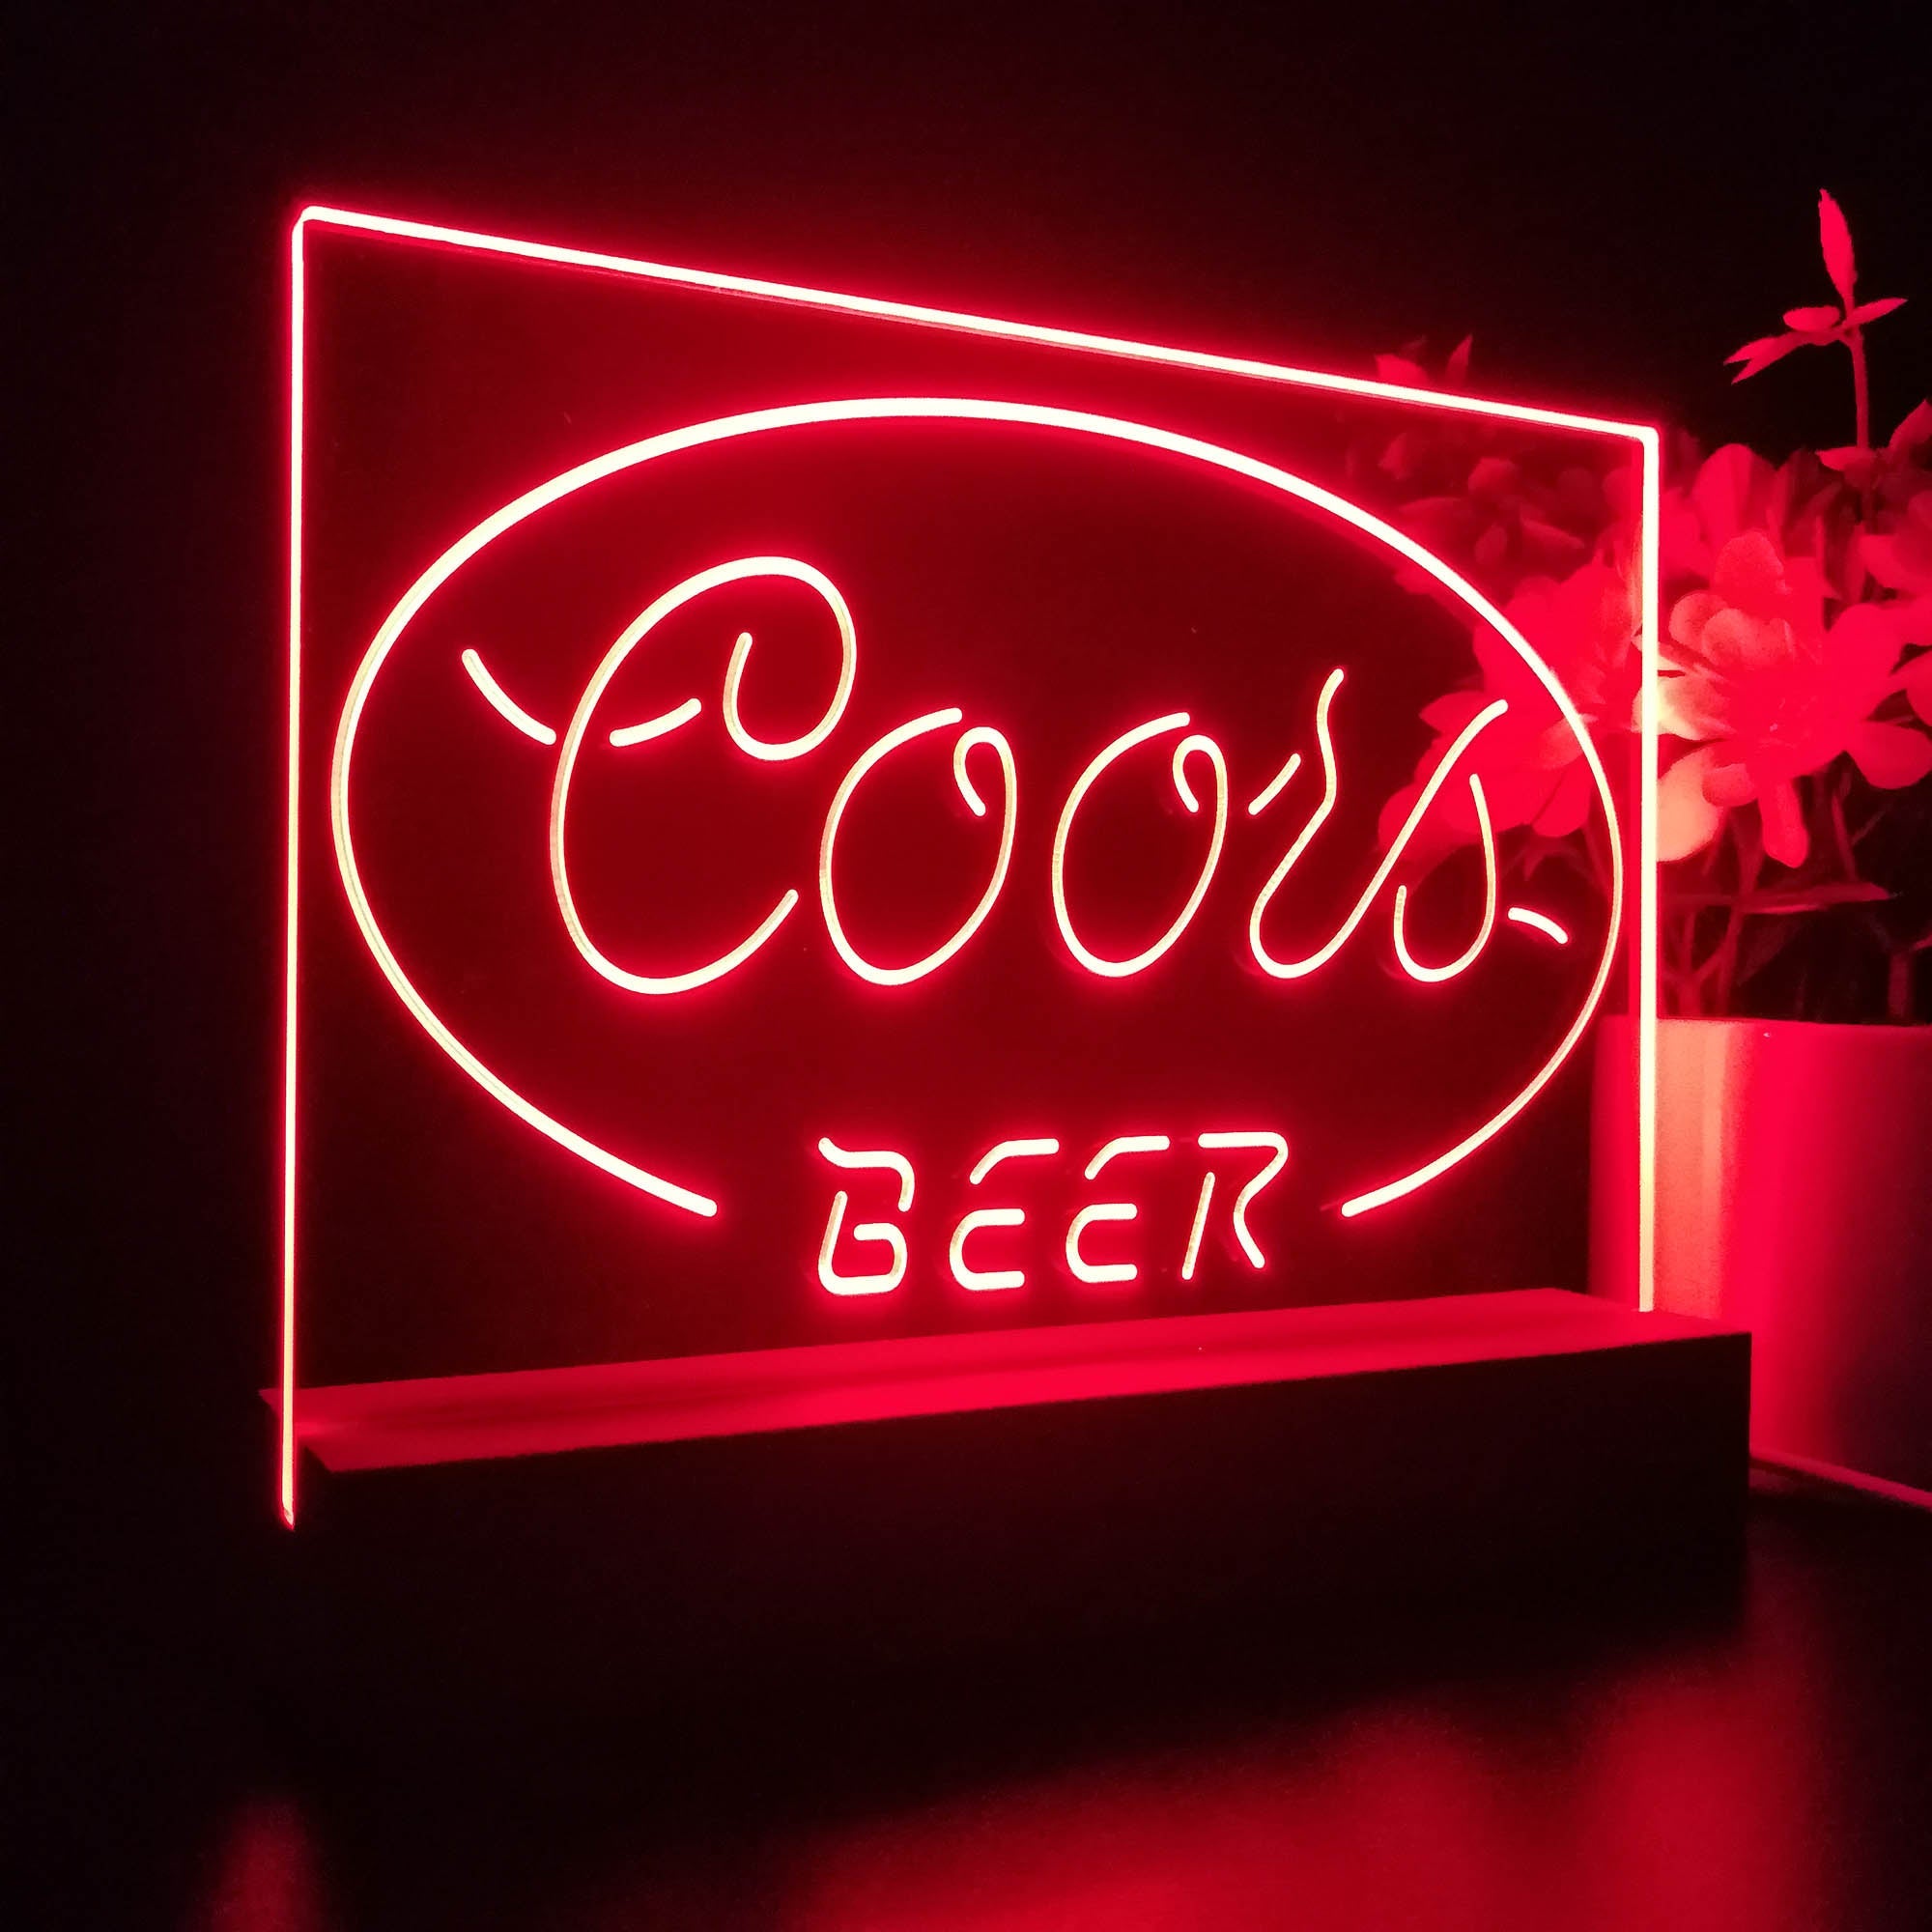 Coors Beer Oval Classic Neon Sign Pub Bar Lamp